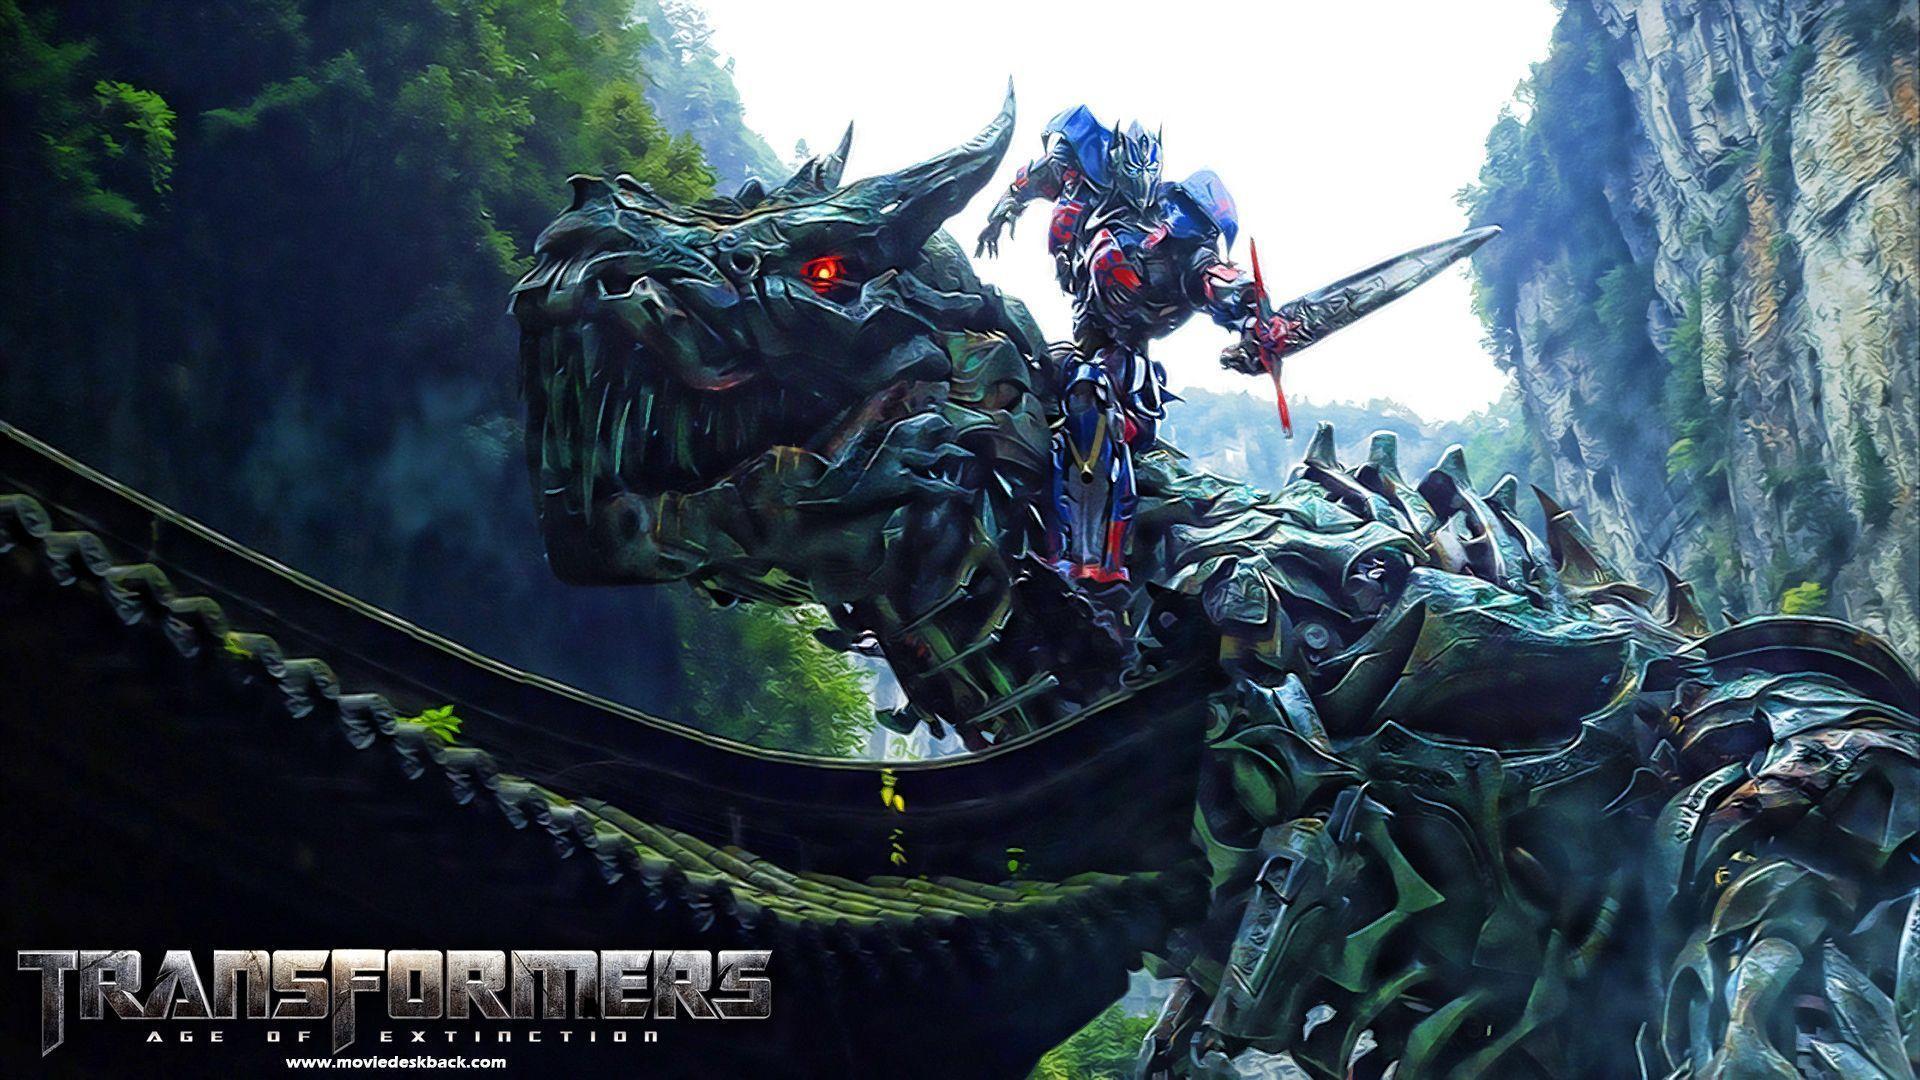 Transformers 5 Coming In 2017?